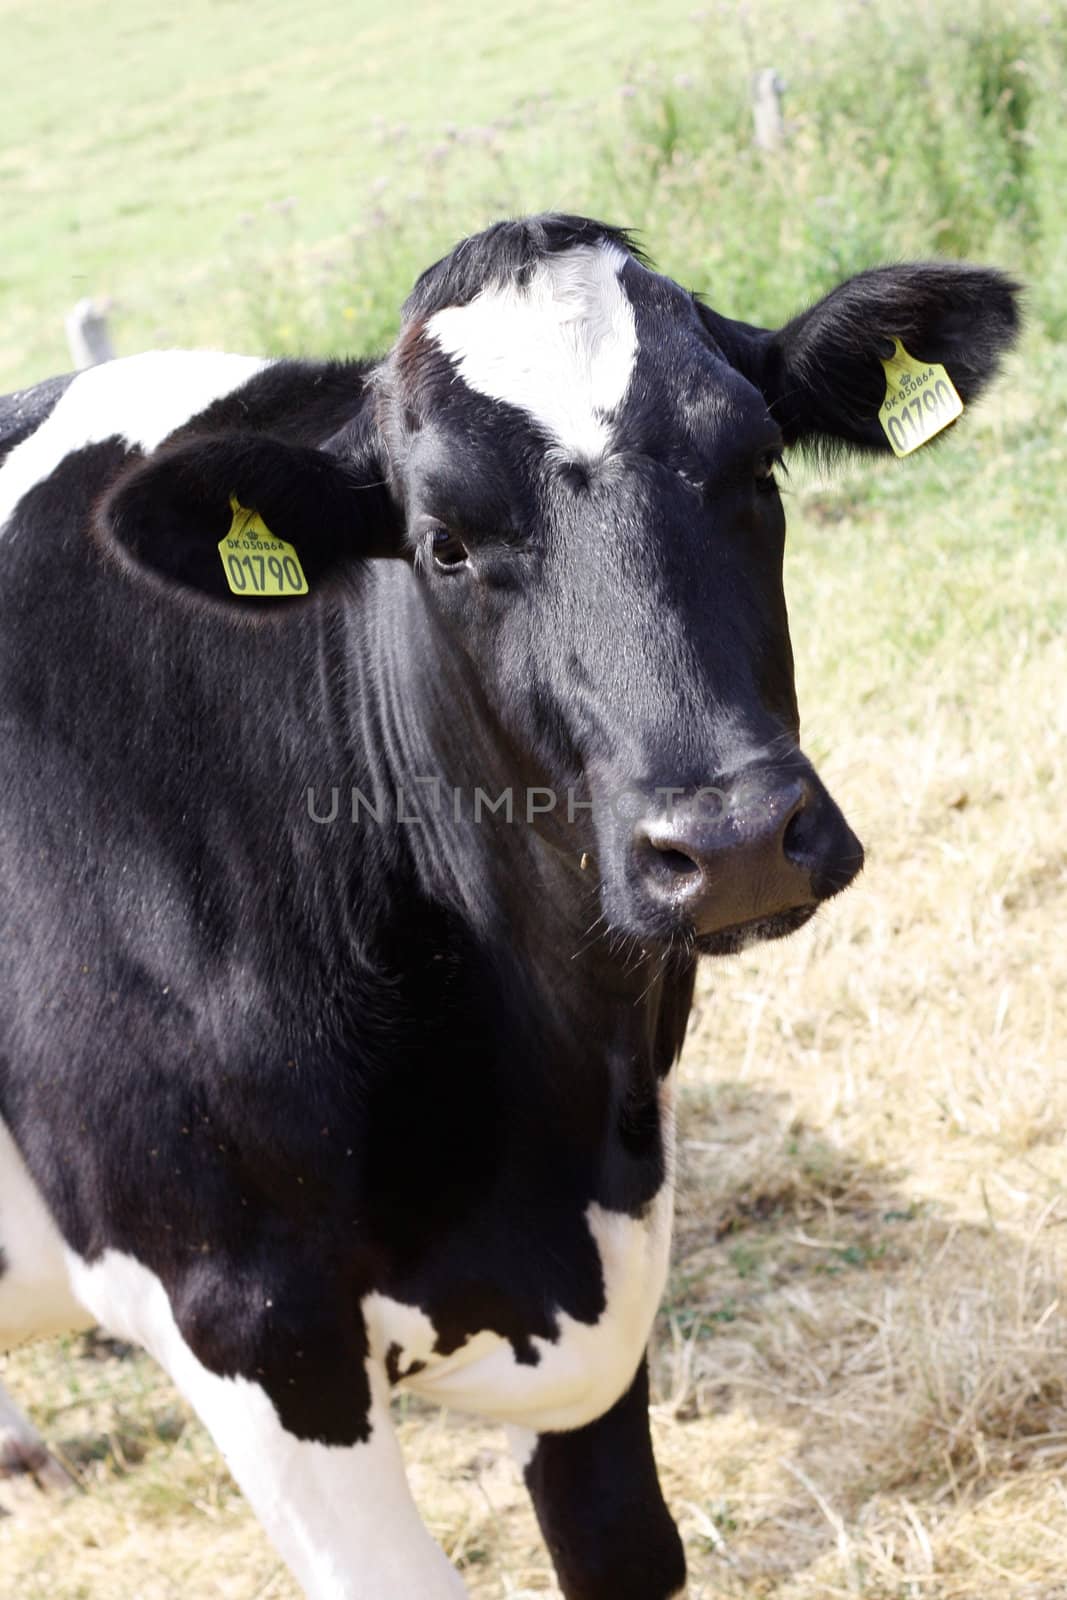 A cow looking into the camera